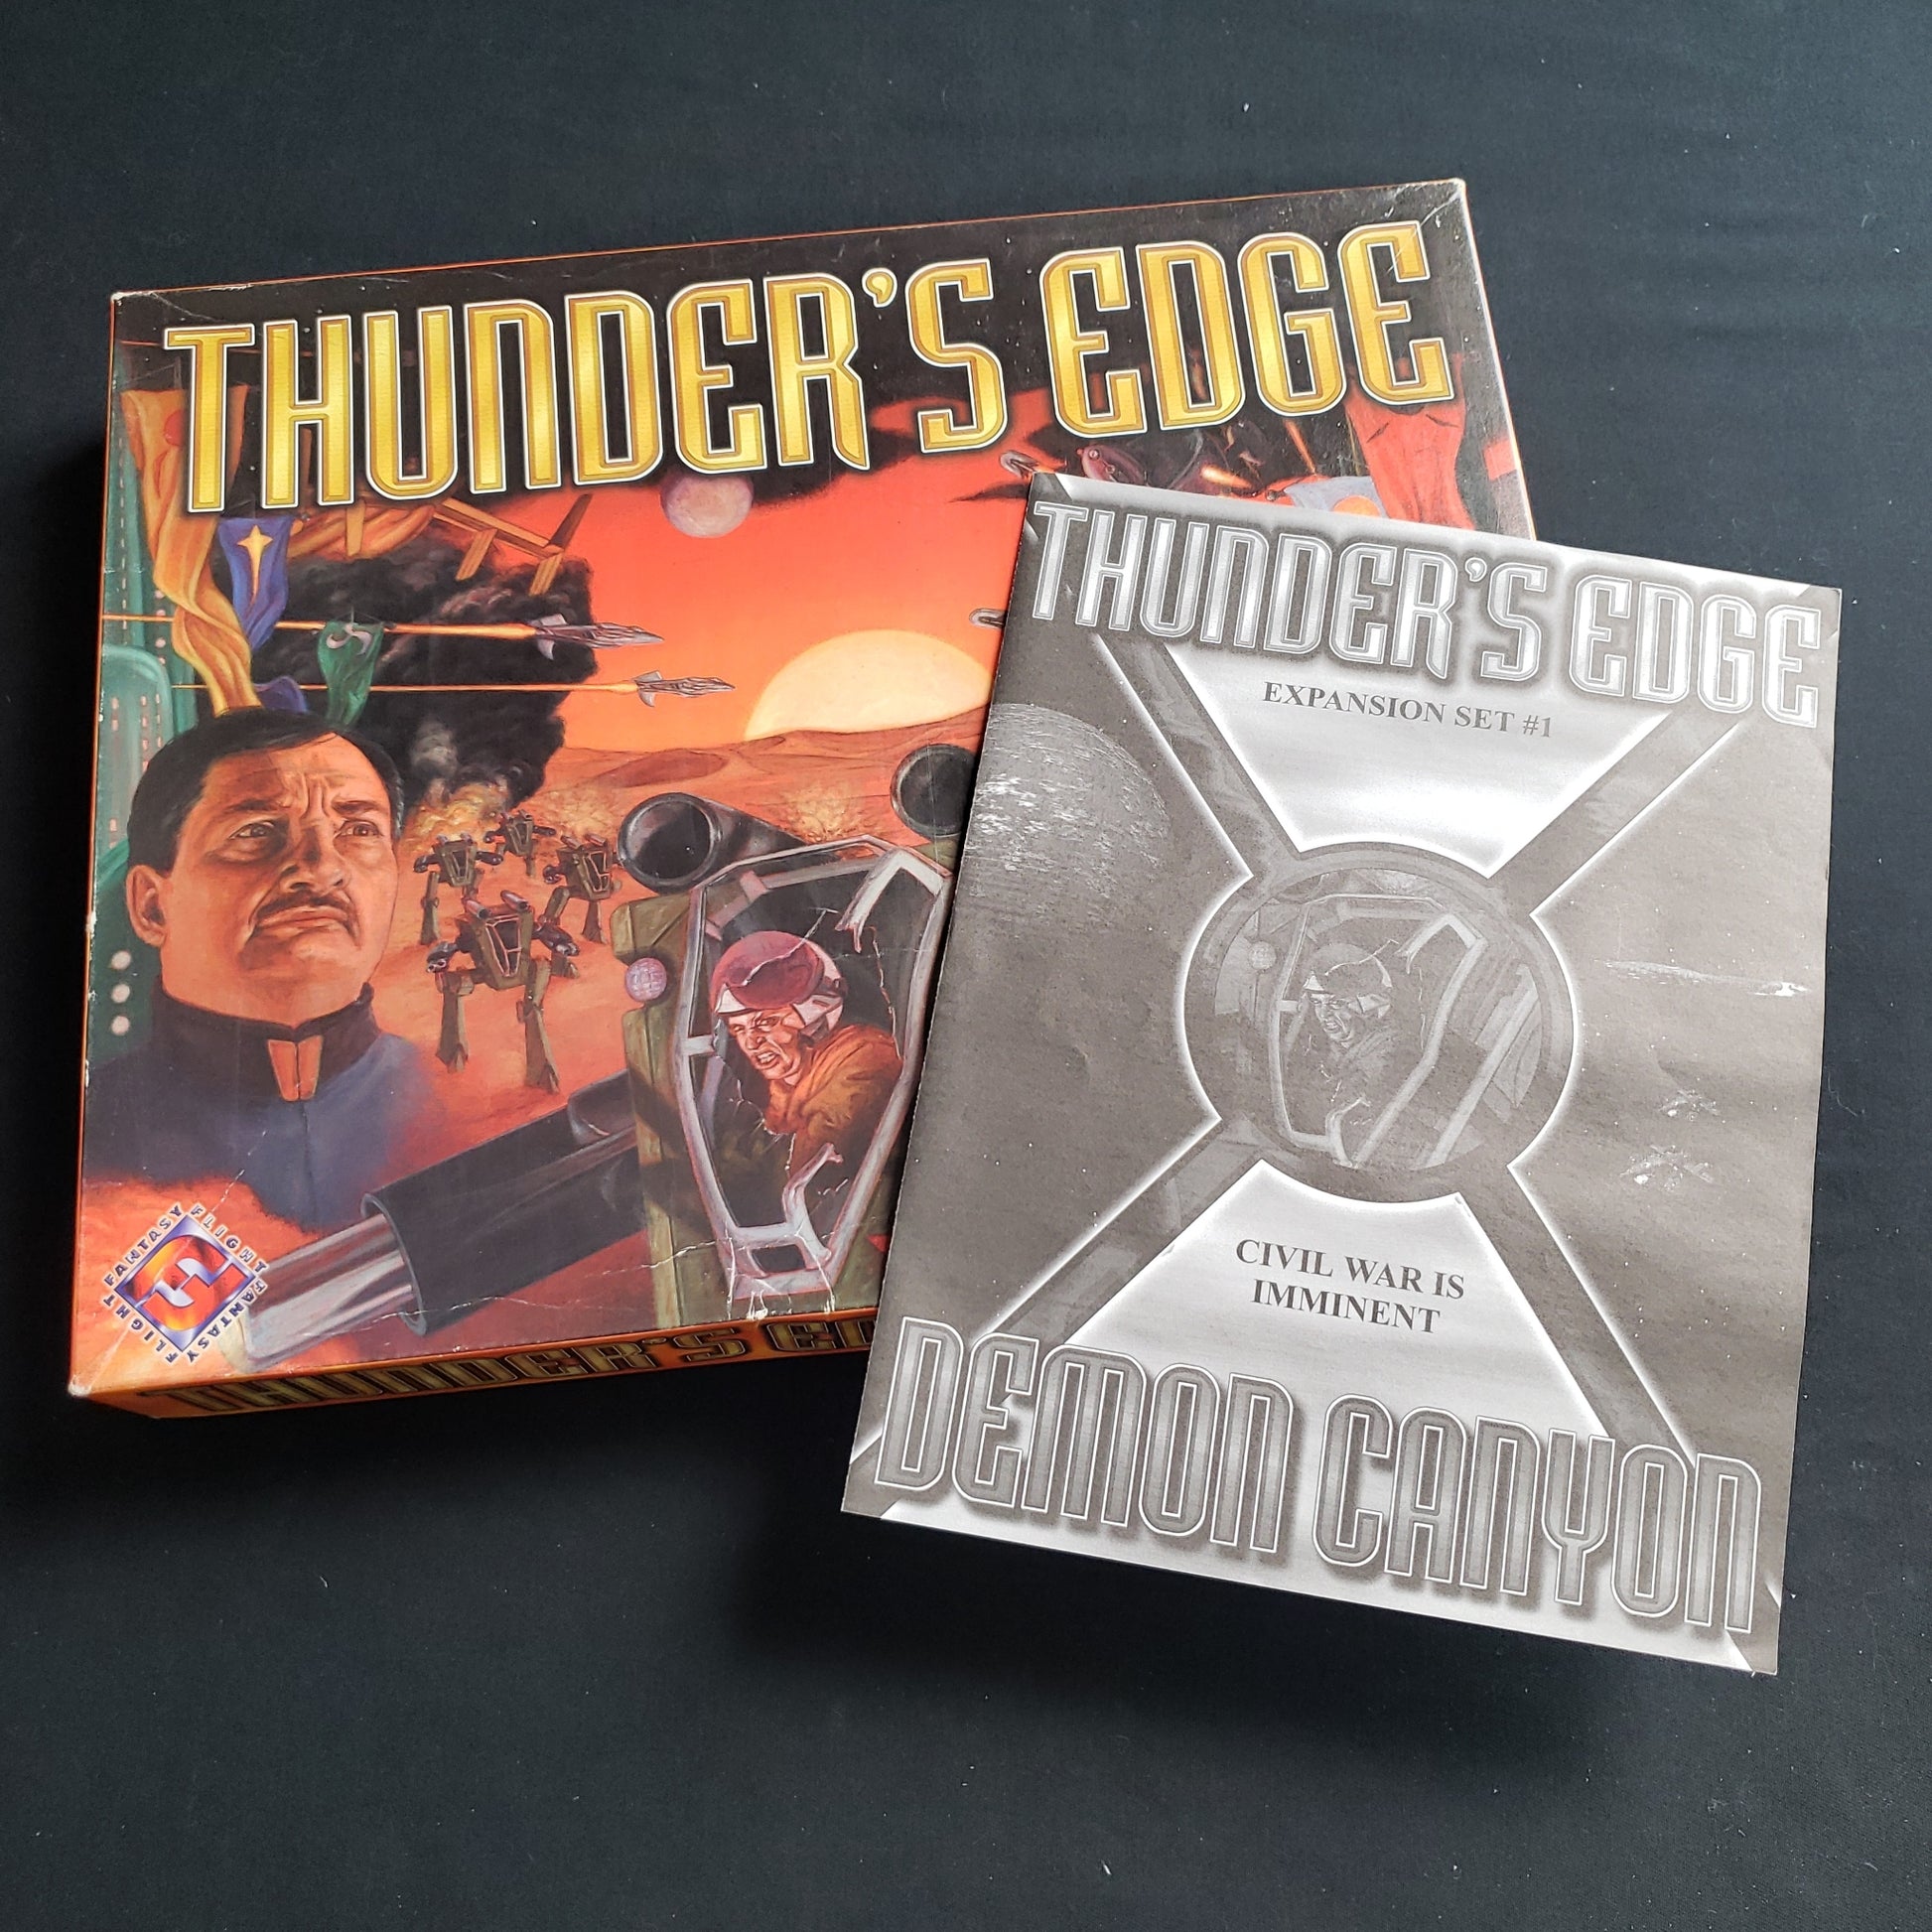 Image shows the front cover of the box of the Thunder's Edge board game, with the instructions for the Demon Canyon expansion sitting on top of it